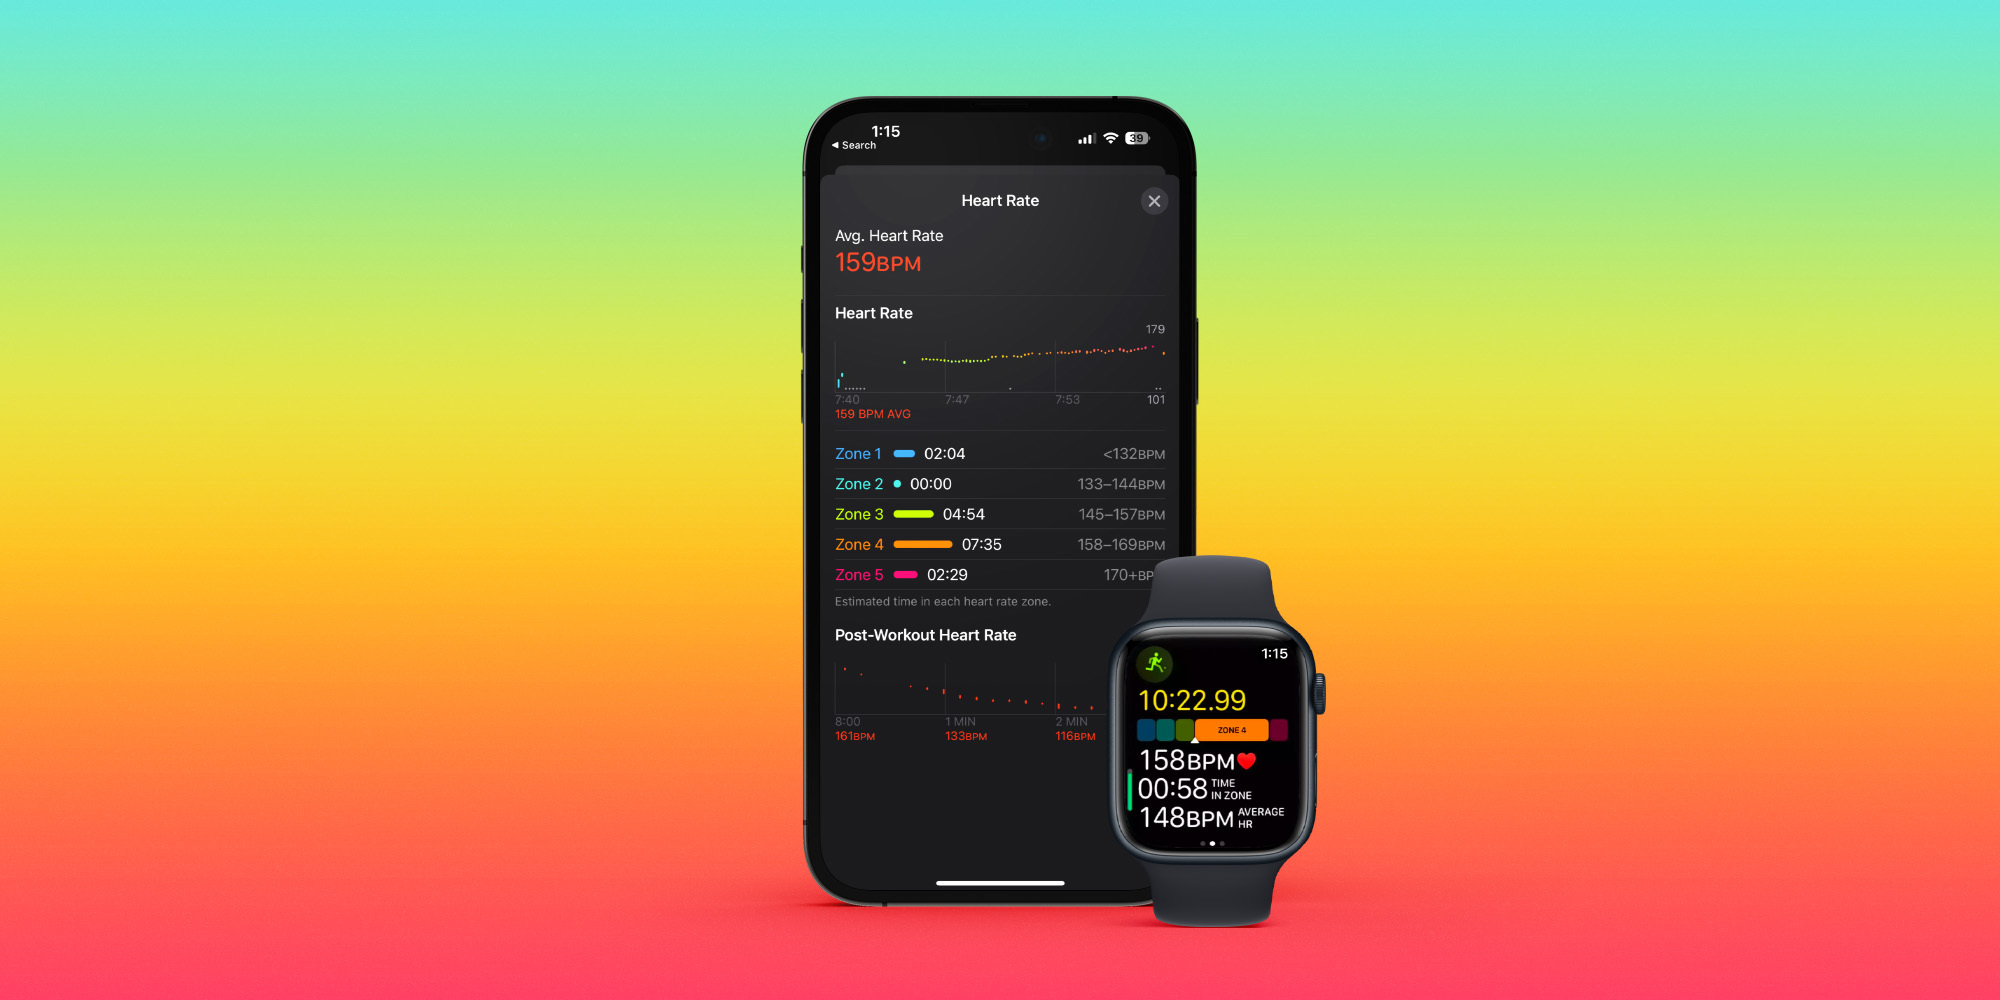 How to See Your Target Heart Rate Zones for Apple Watch on iPhone